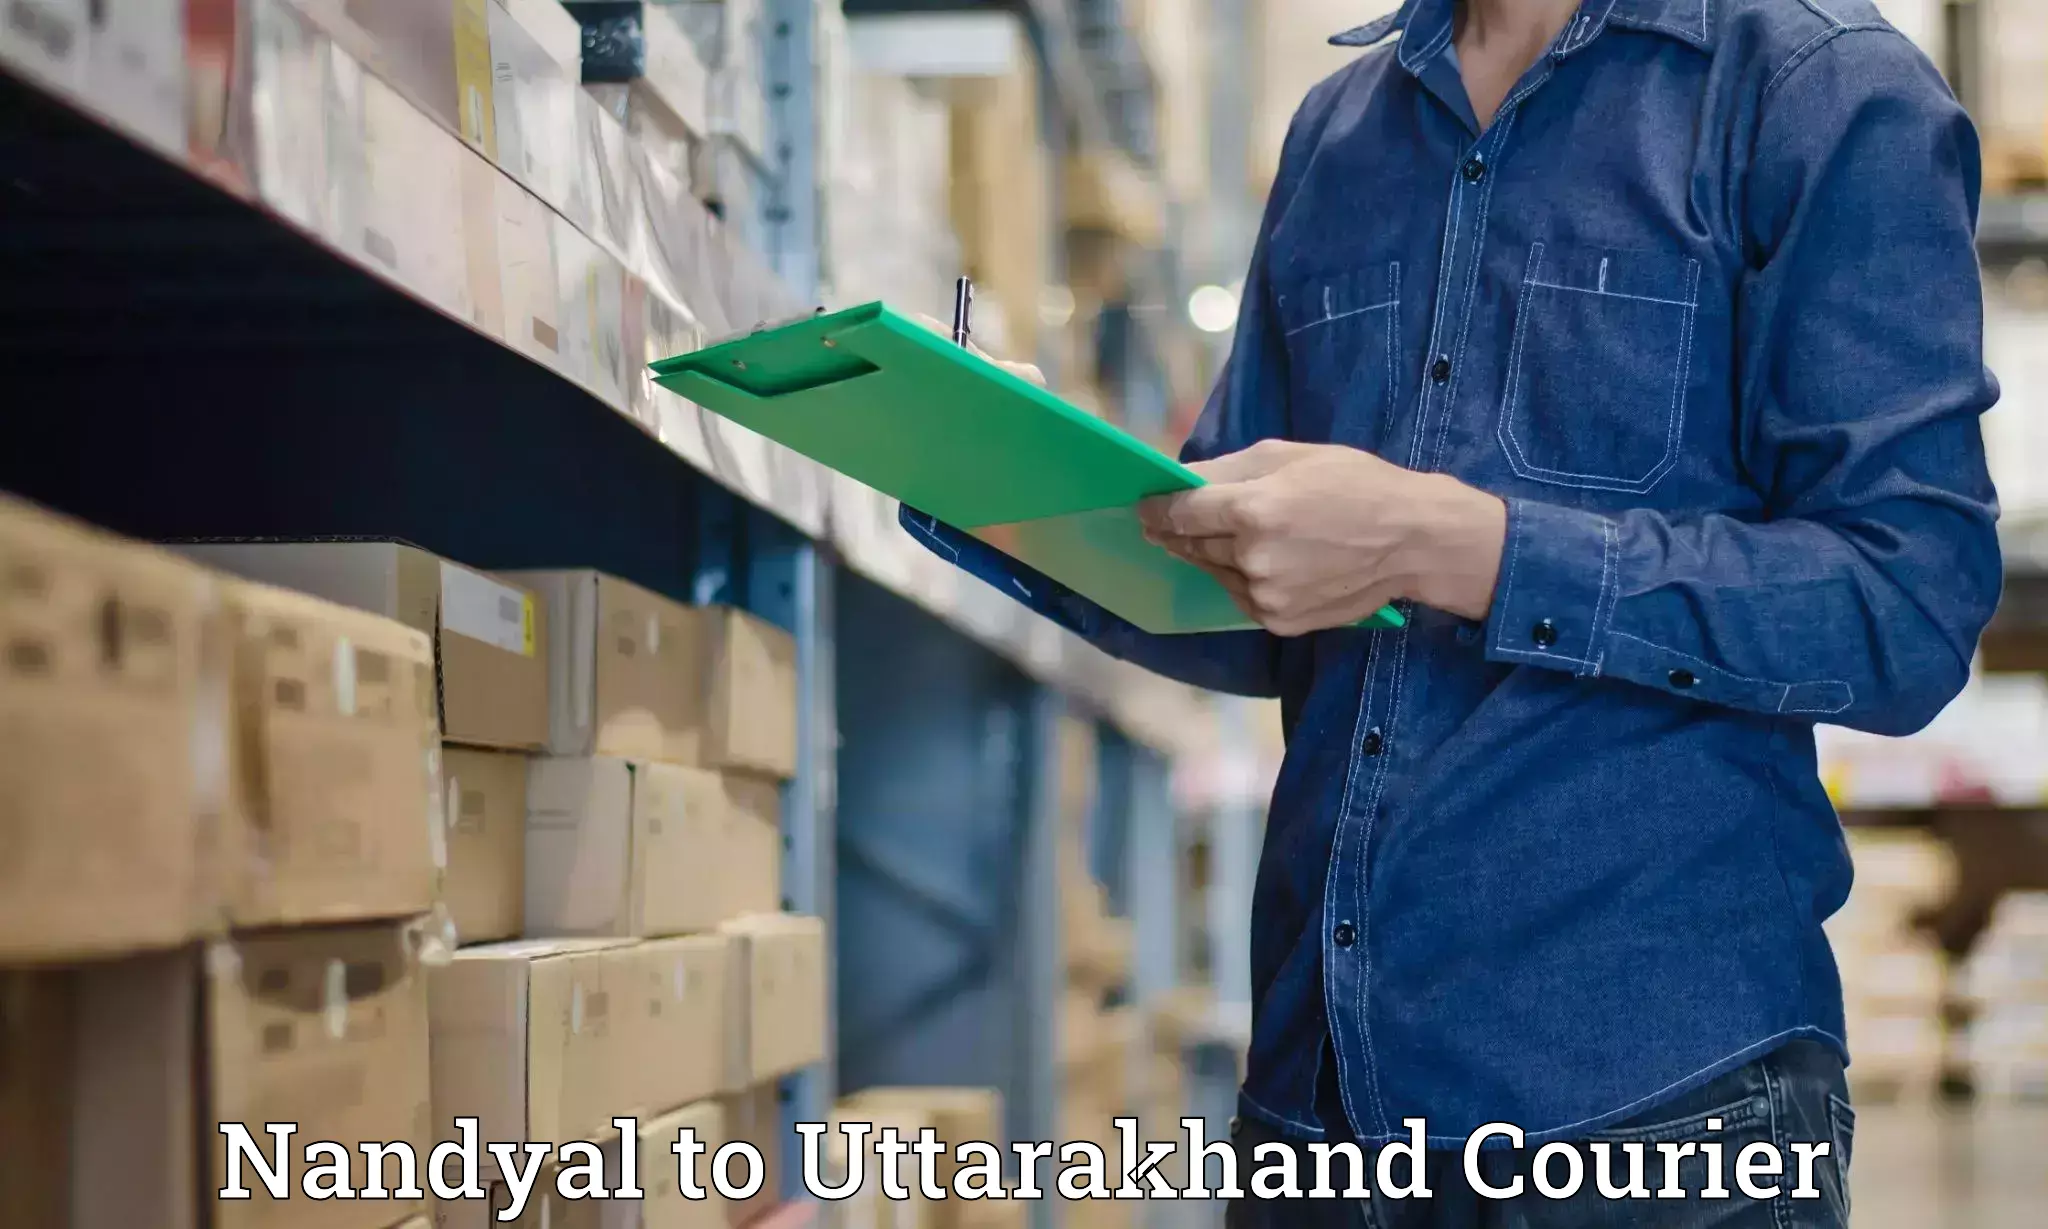 Multi-national courier services Nandyal to Haridwar